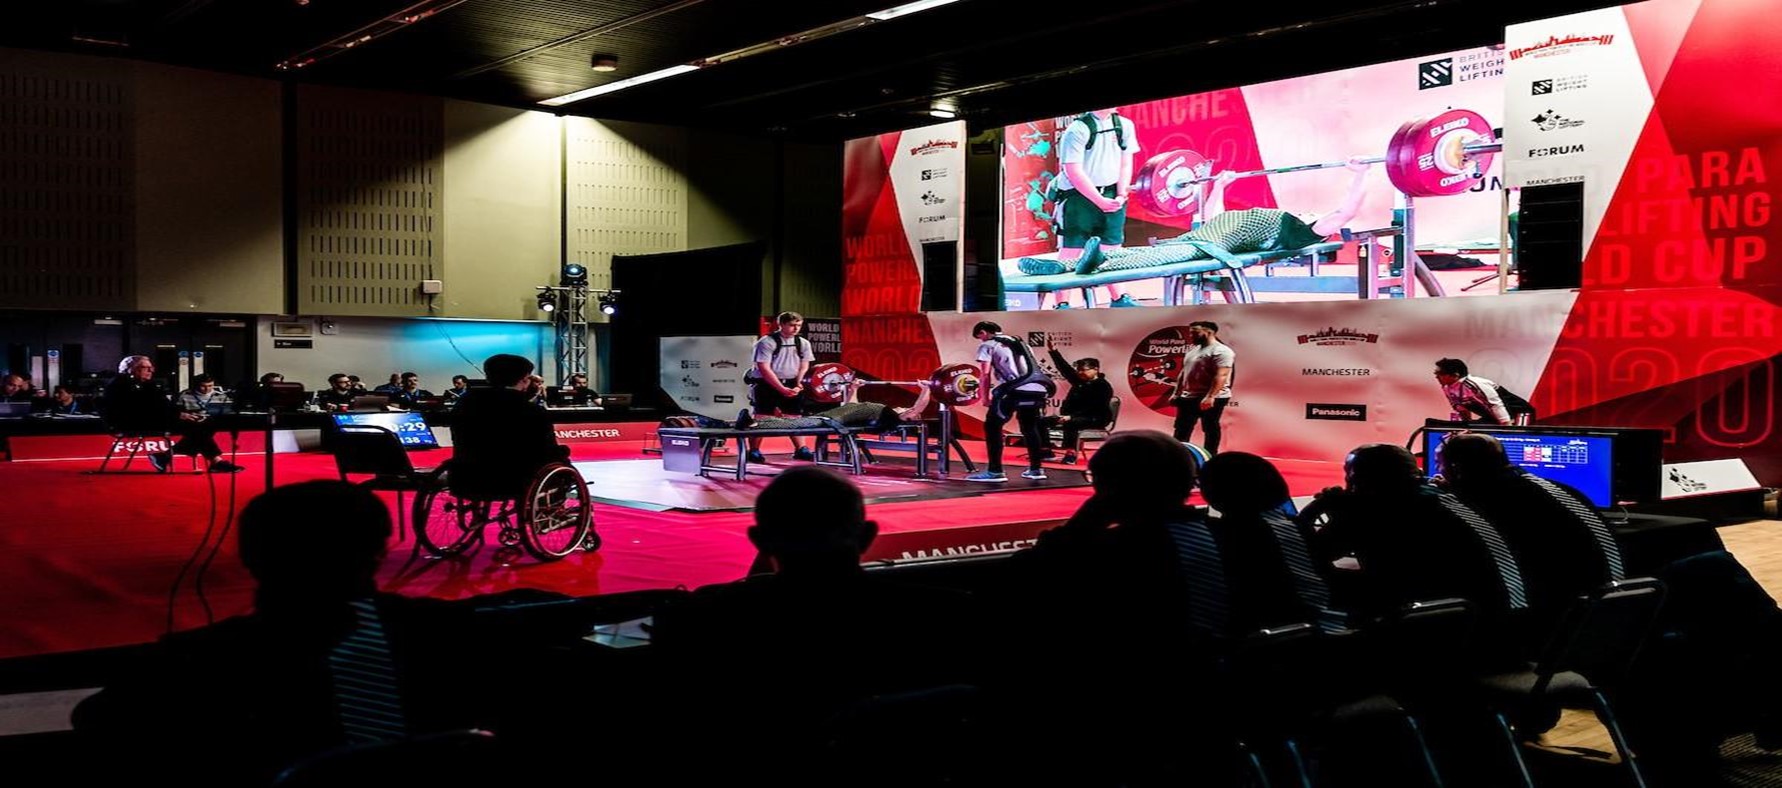 For the First Time Abroad Panasonic Provided Its Power Assist Suit to the  Para Powerlifting International Competition Held in Manchester, Sponsorship & Events, Sponsorship & Events, Feature Story